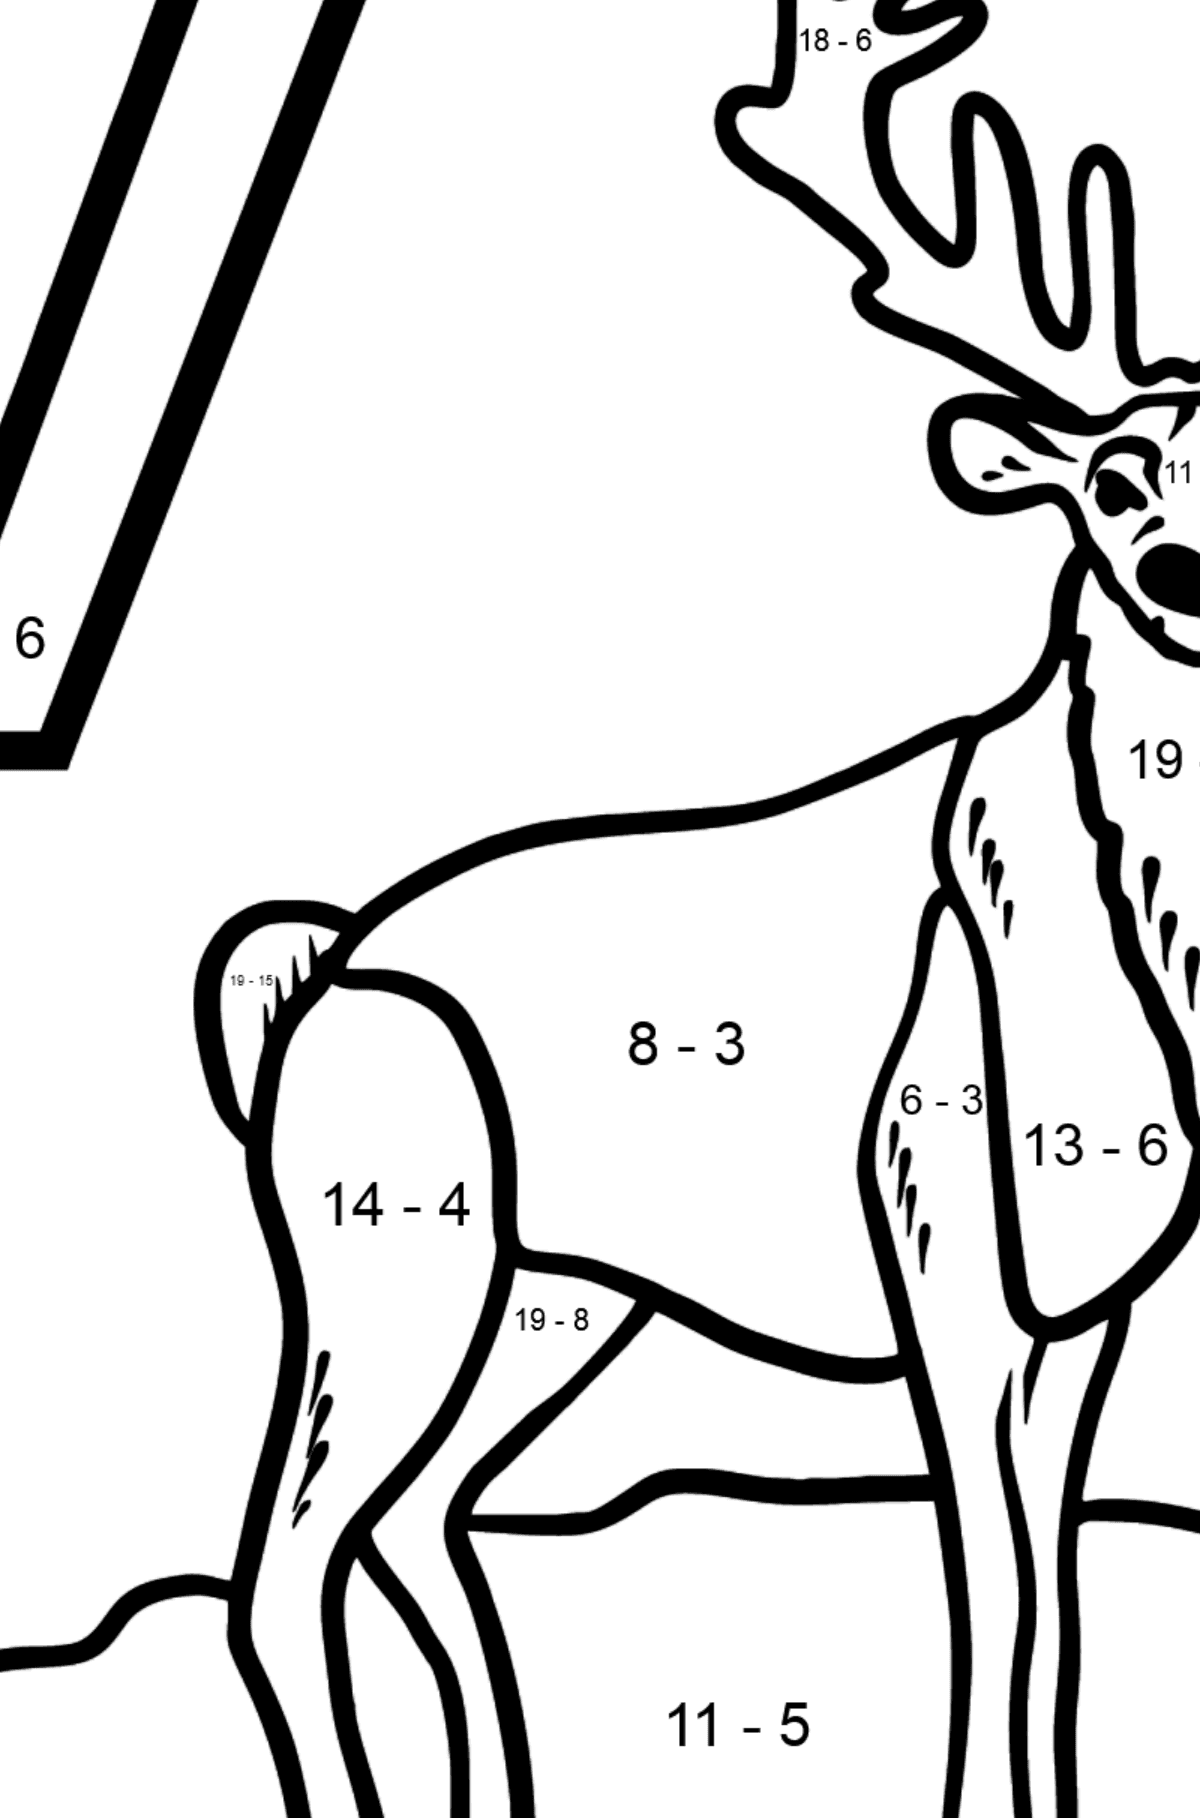 Portuguese Letter V coloring pages - VEADO - Math Coloring - Subtraction for Kids